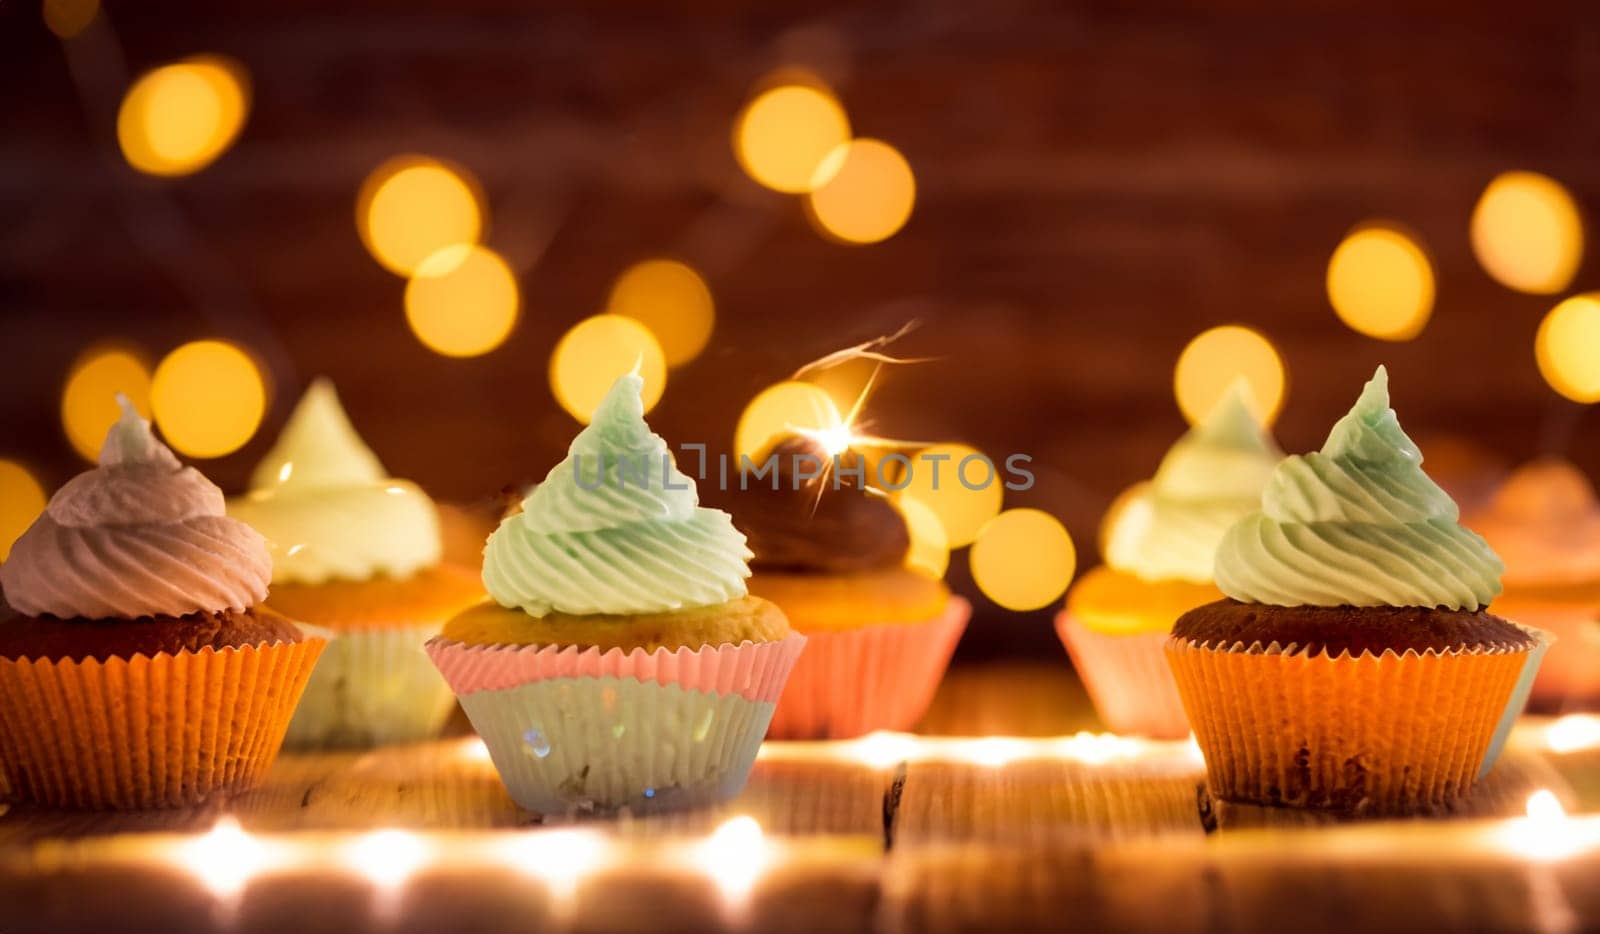 Colorful cupcakes with warm bokh lights baxckground by compuinfoto